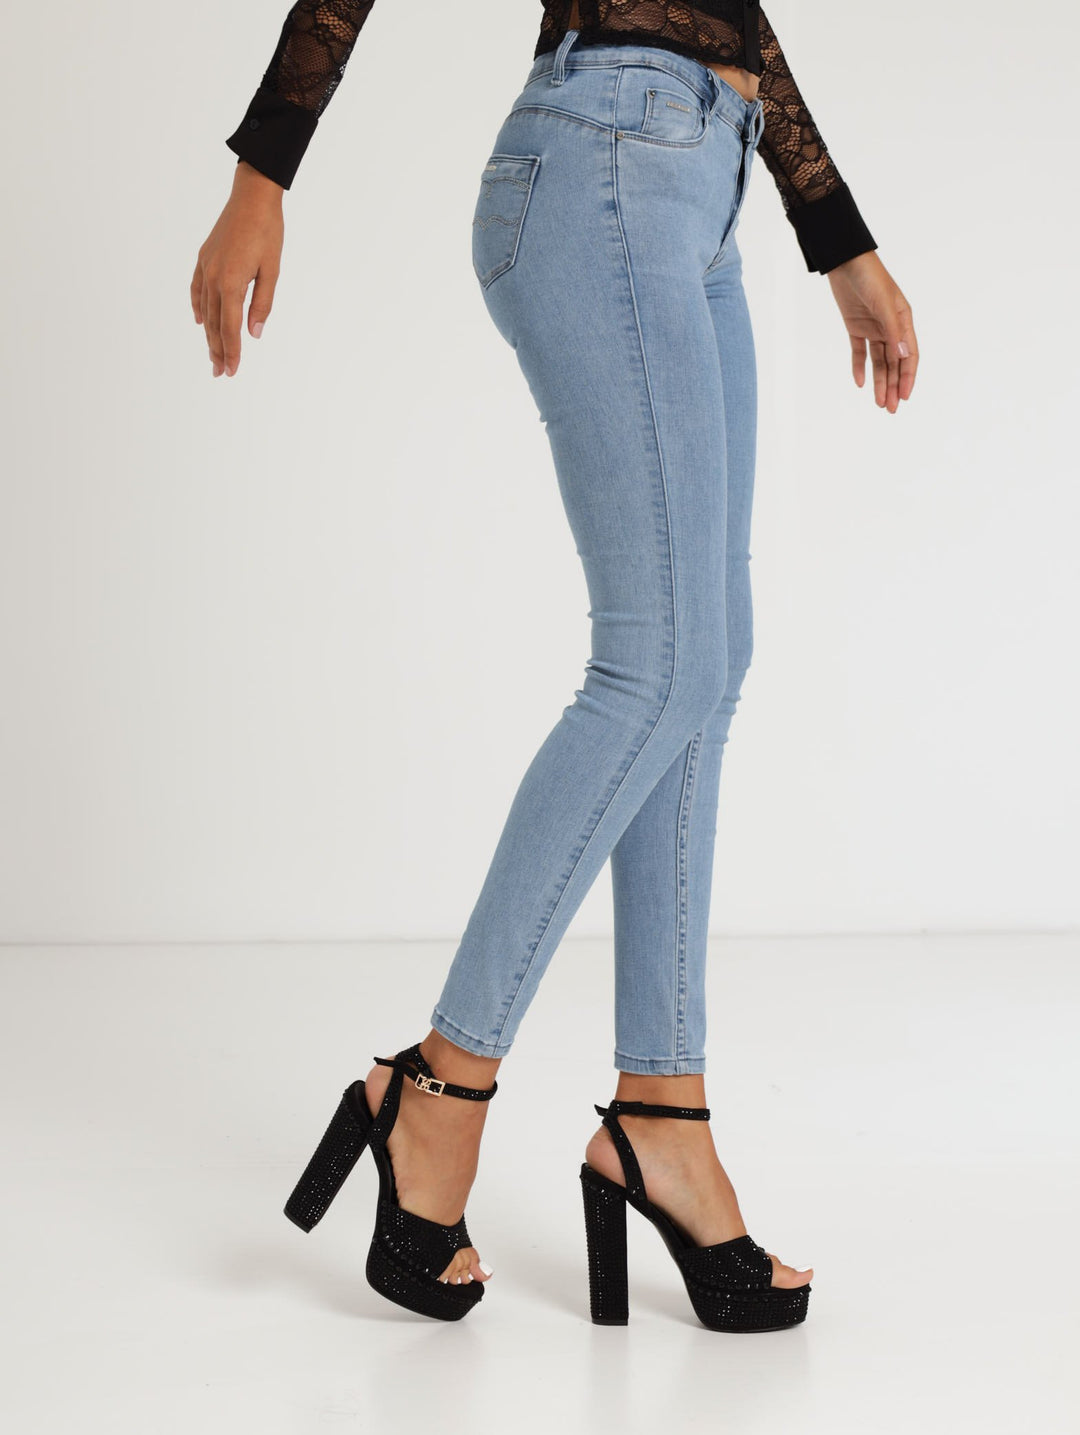 Ladies Summer Days: Axel Skinny Jean With Bling - Light Blue